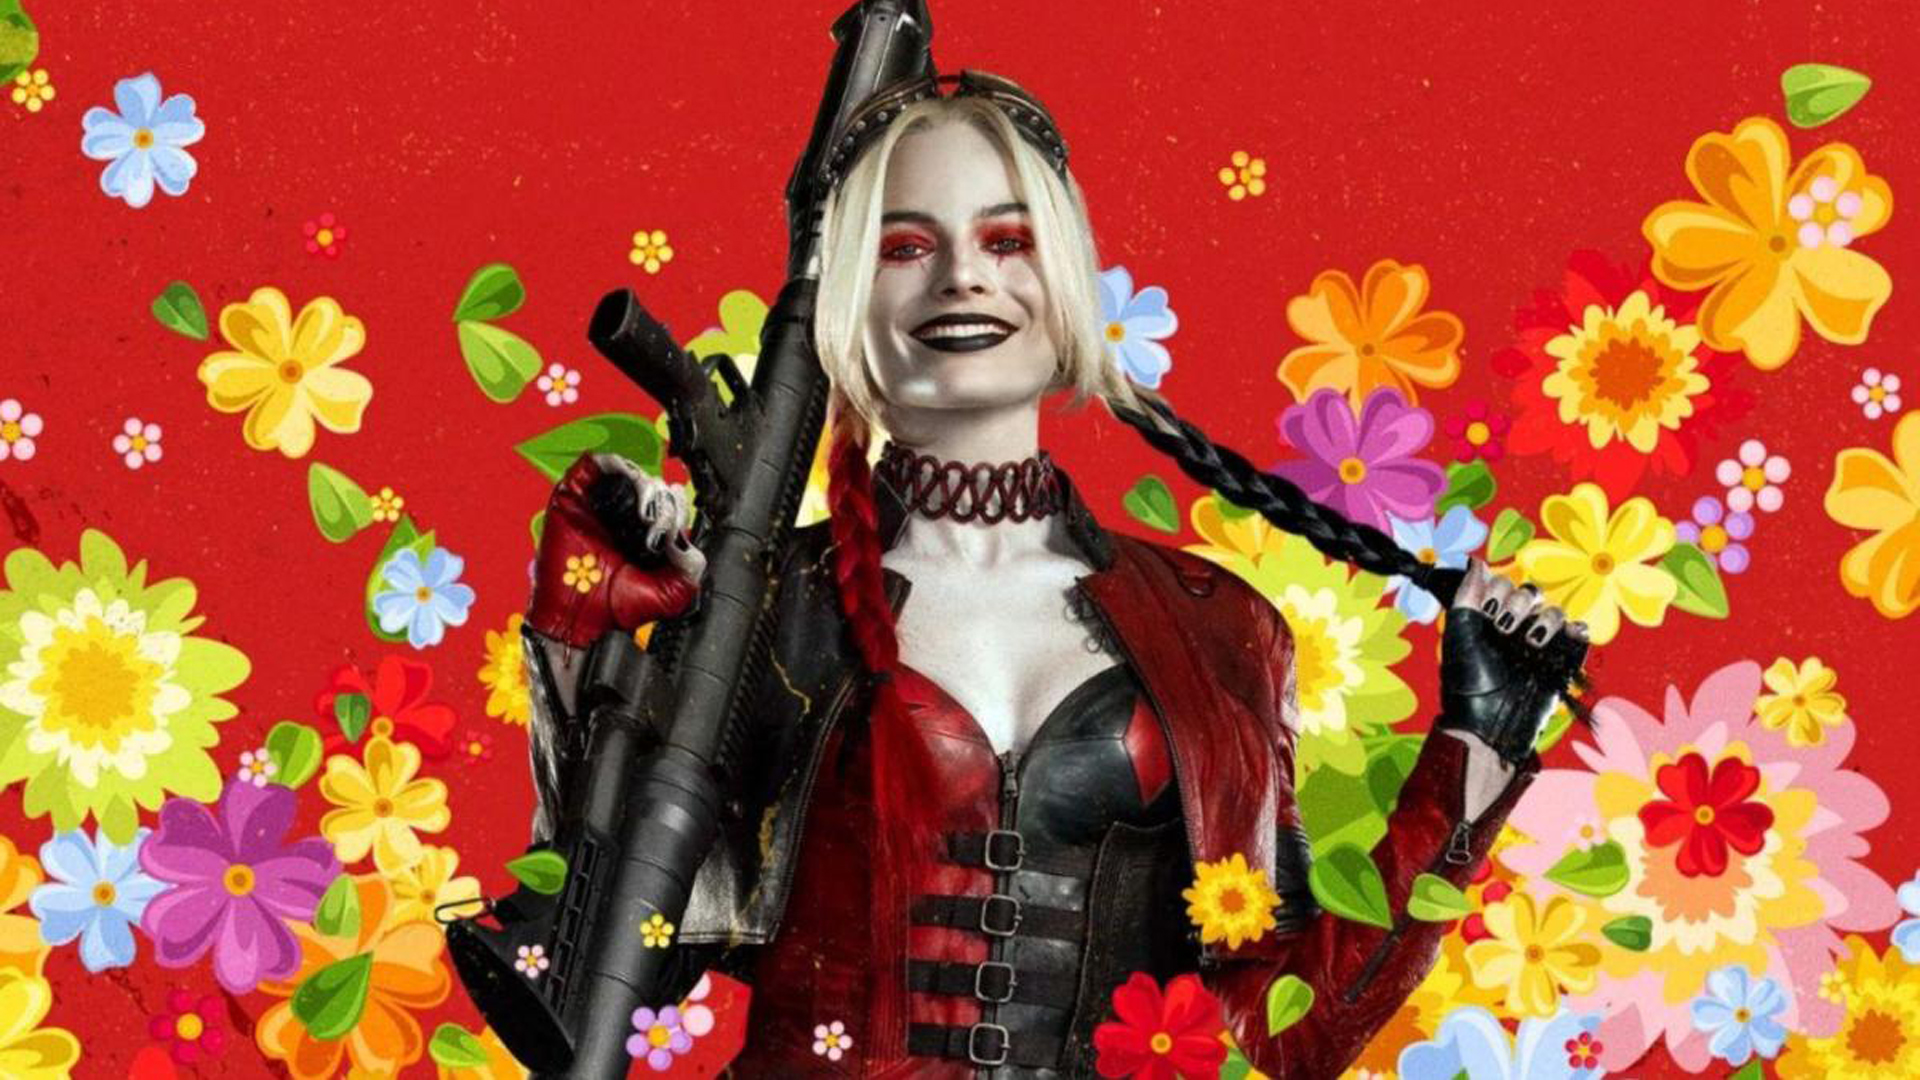 Injustice 2 inspired Harley Quinn's The Suicide Squad look | PCGamesN